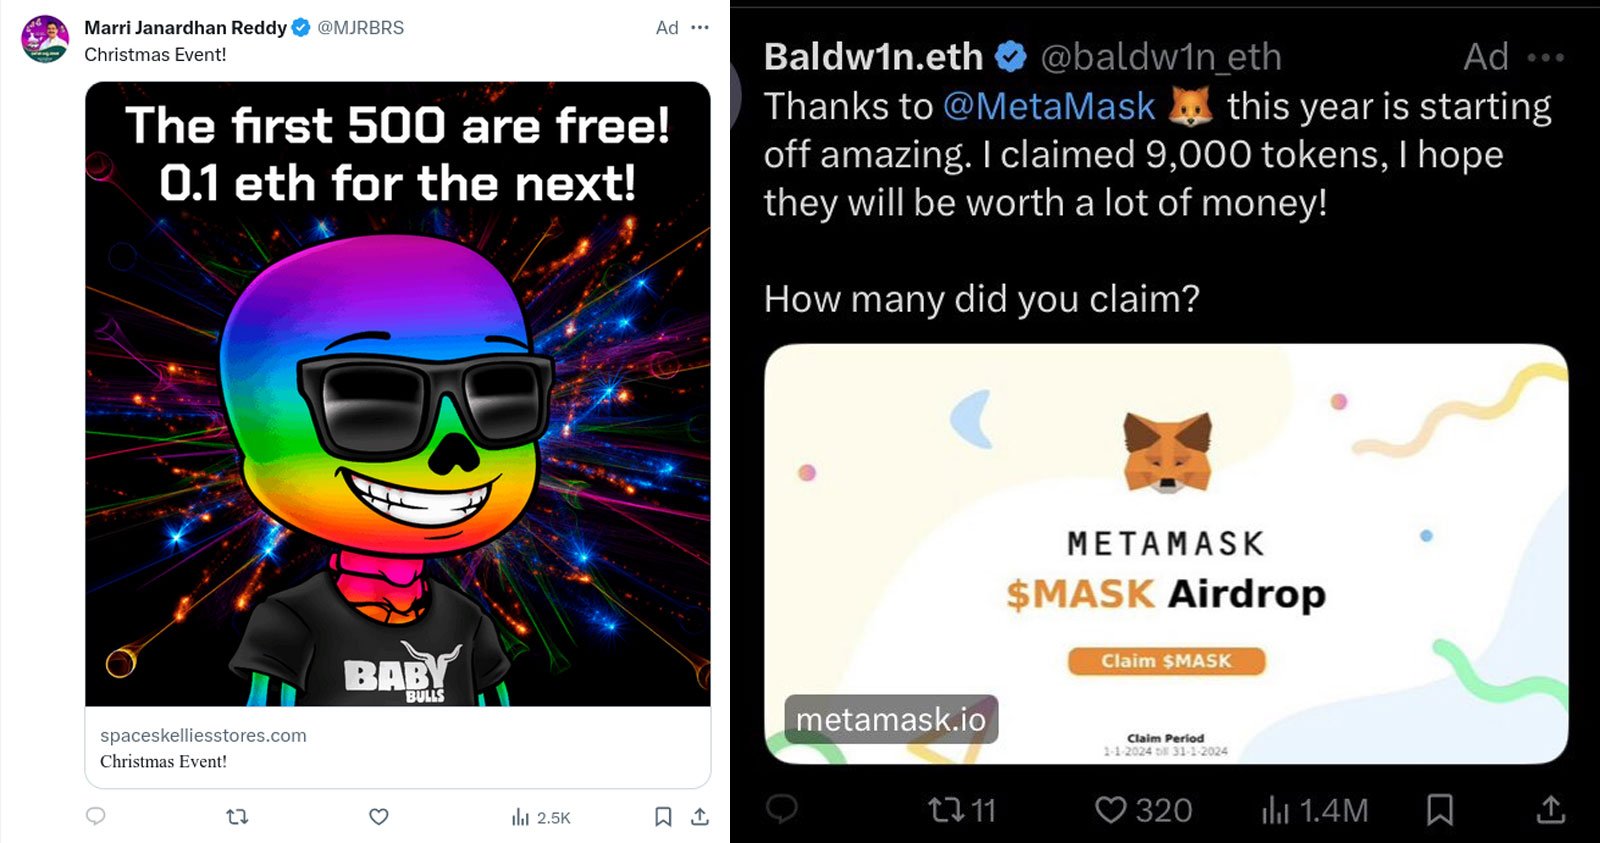 Examples of malicious advertisements on X